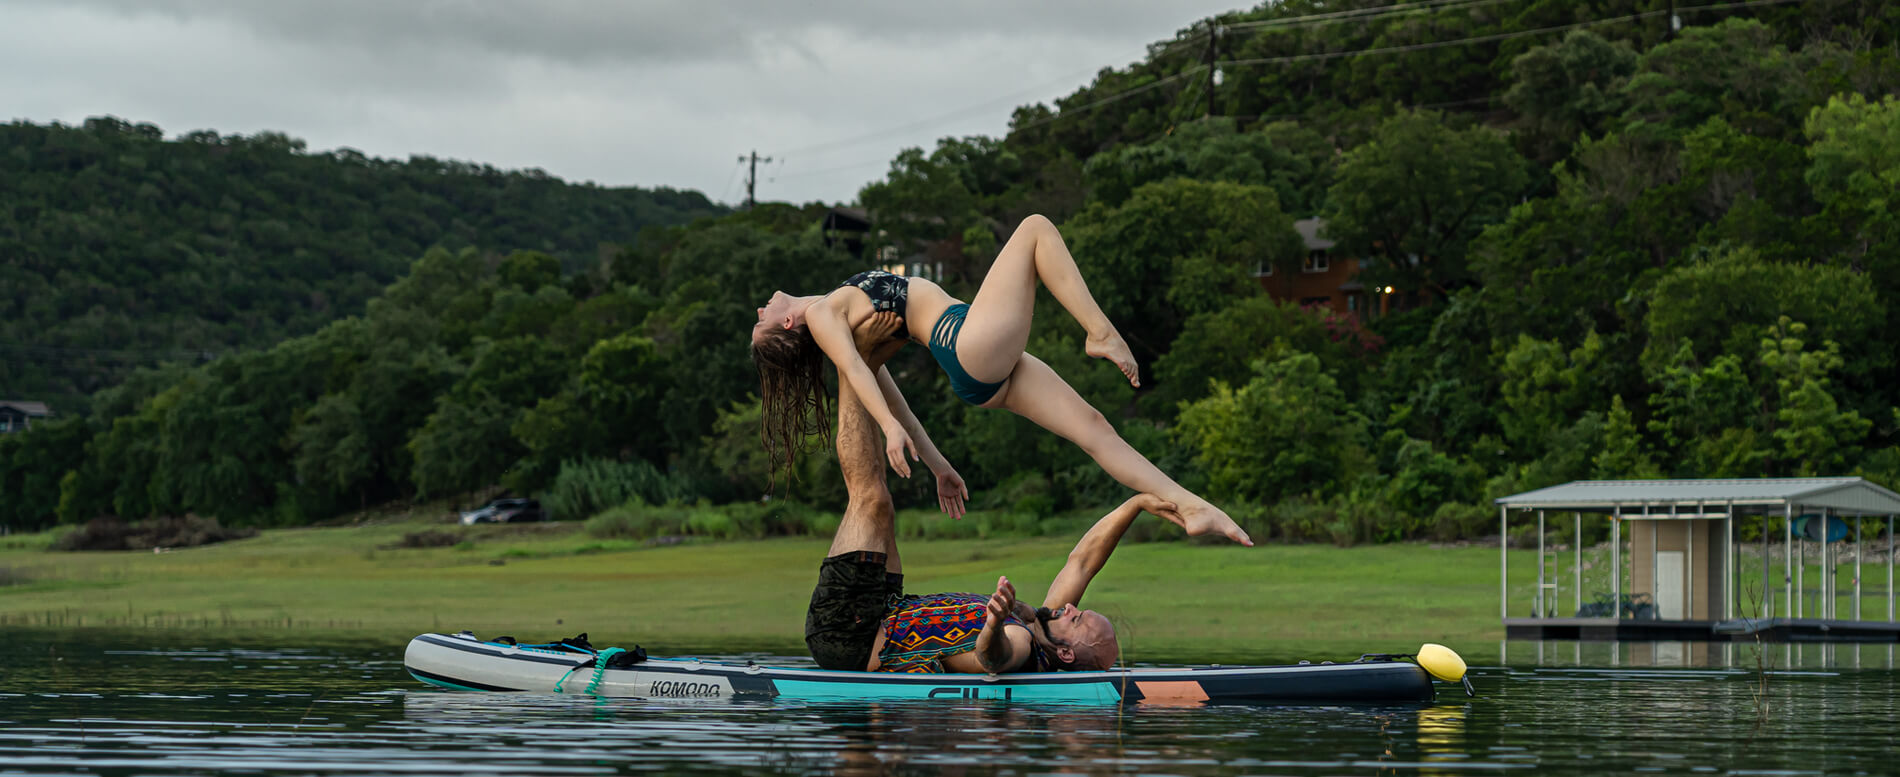 Man and a woman doing yoga pose on a komodo paddle board